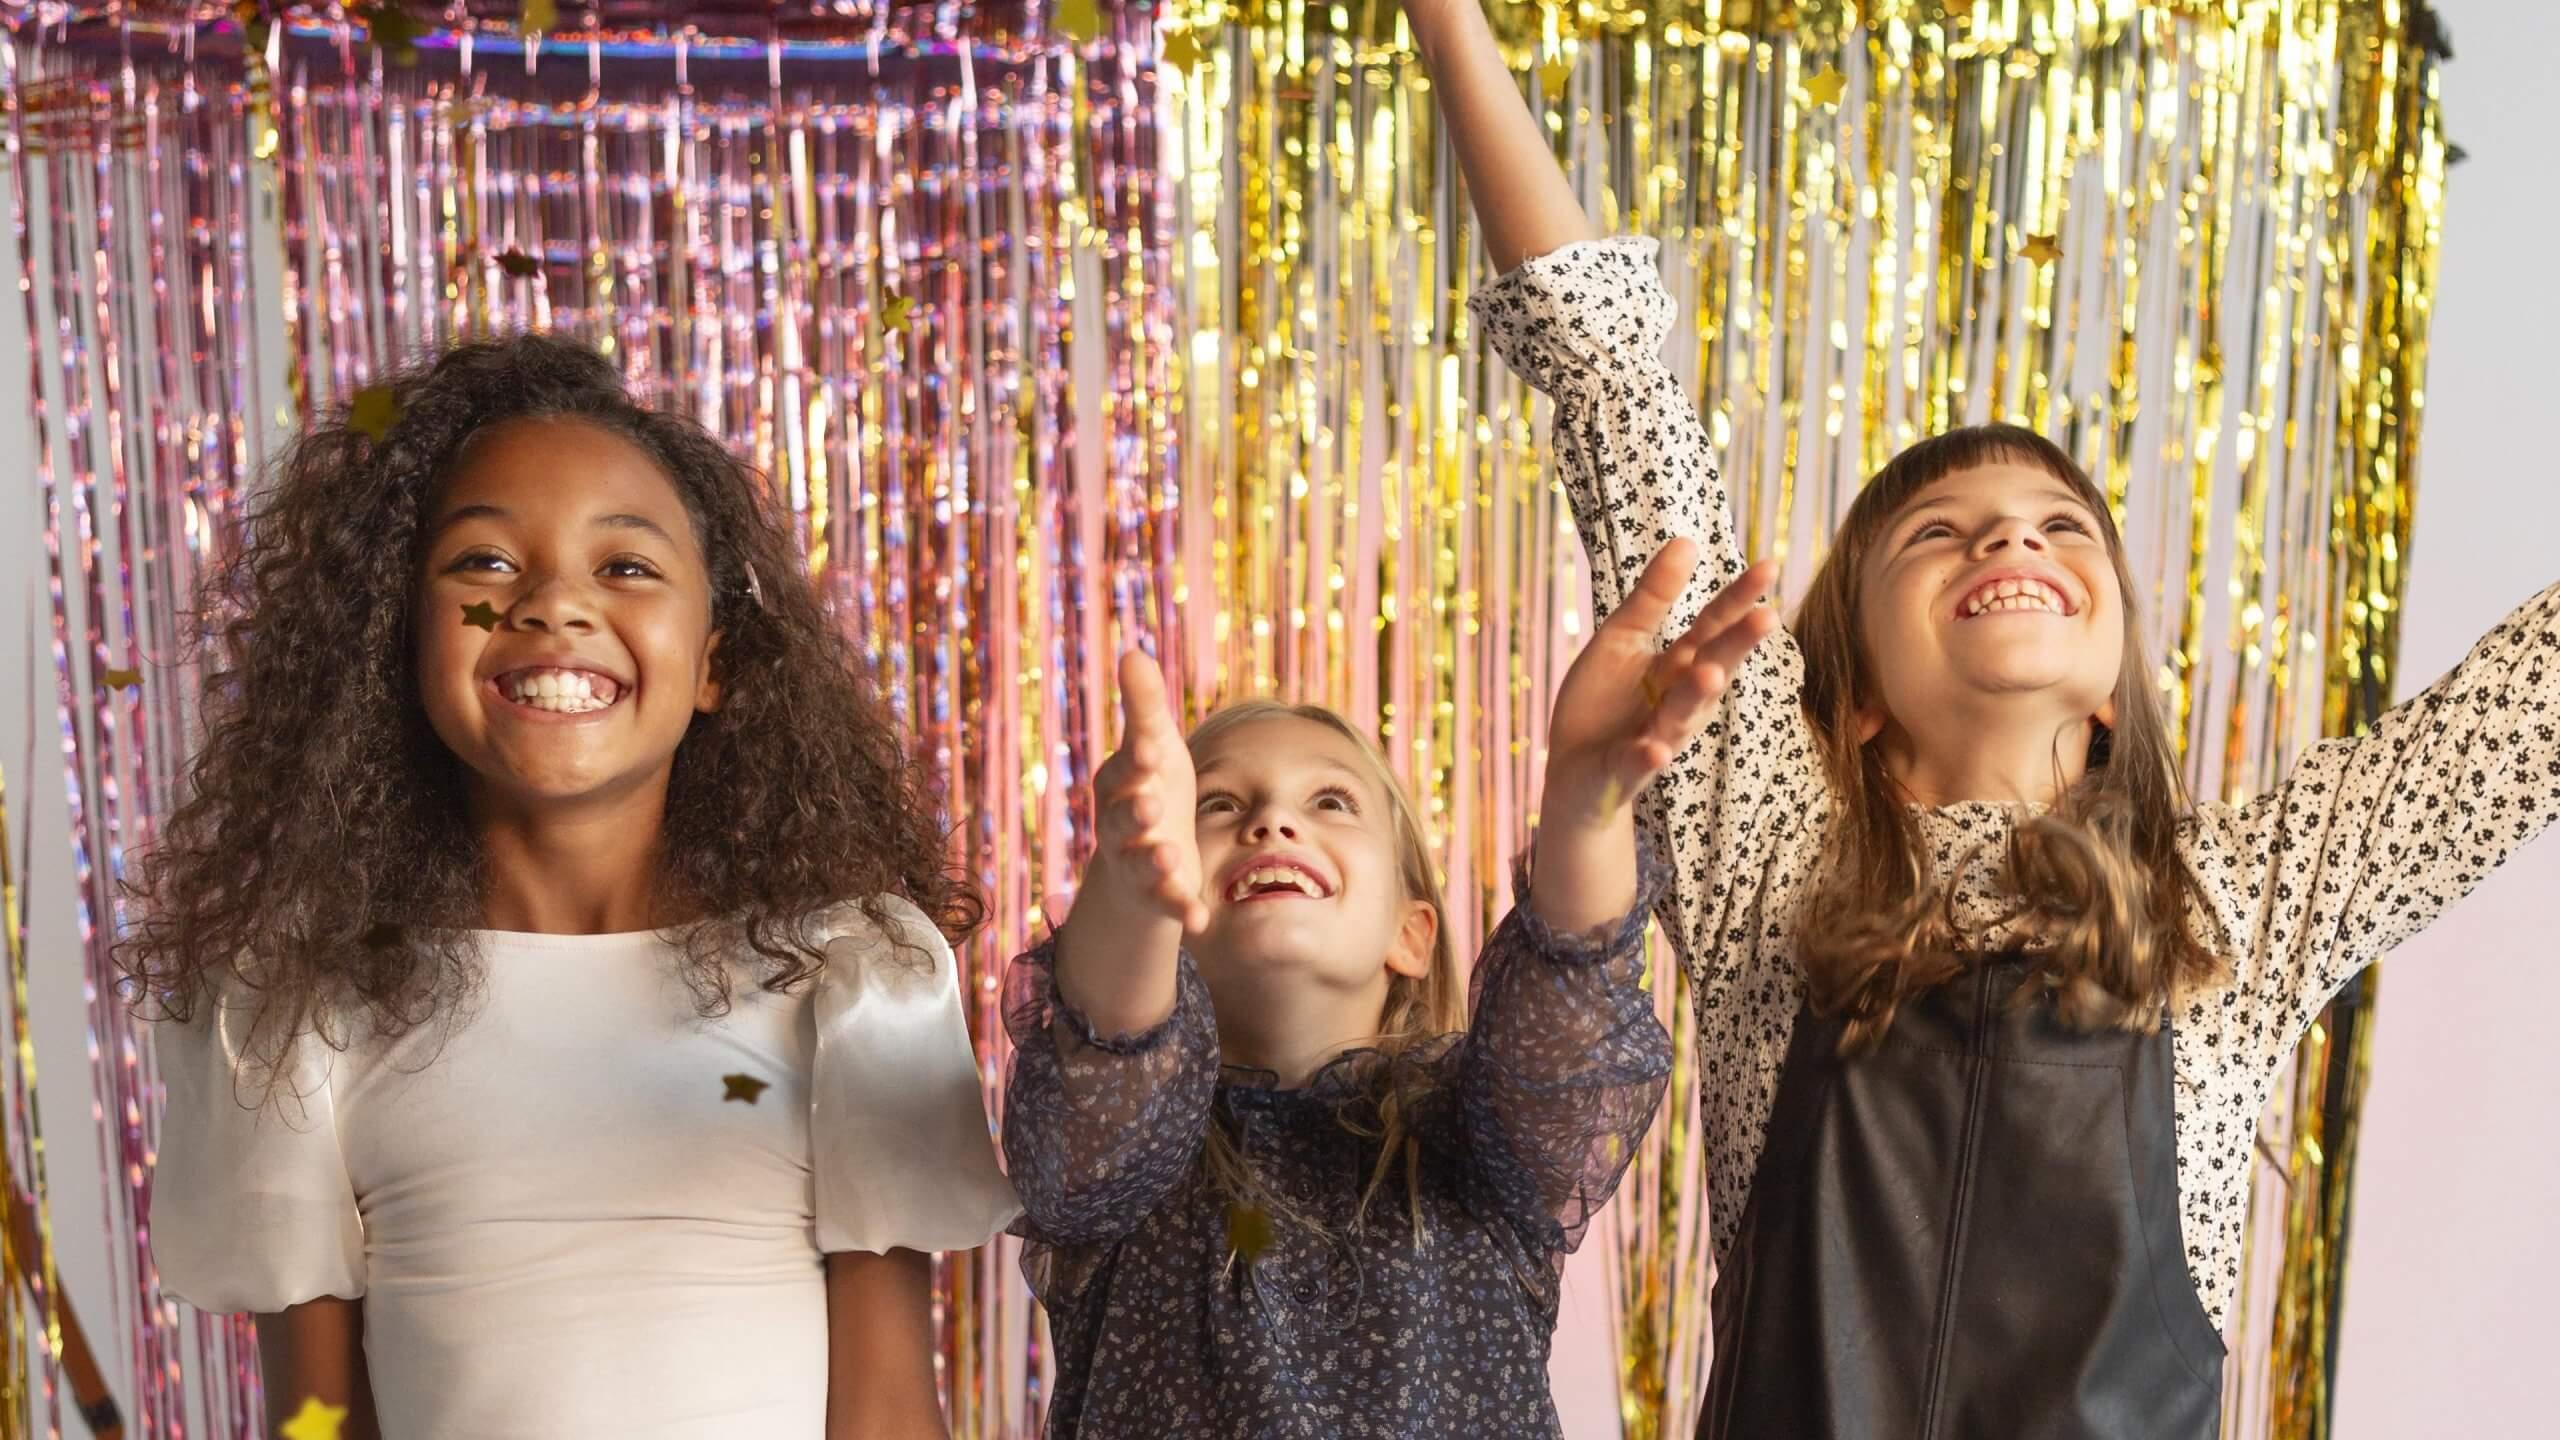 Can You Survive New Year’s Eve with Kids? Have a Memorable and Fun Night with these Ideas